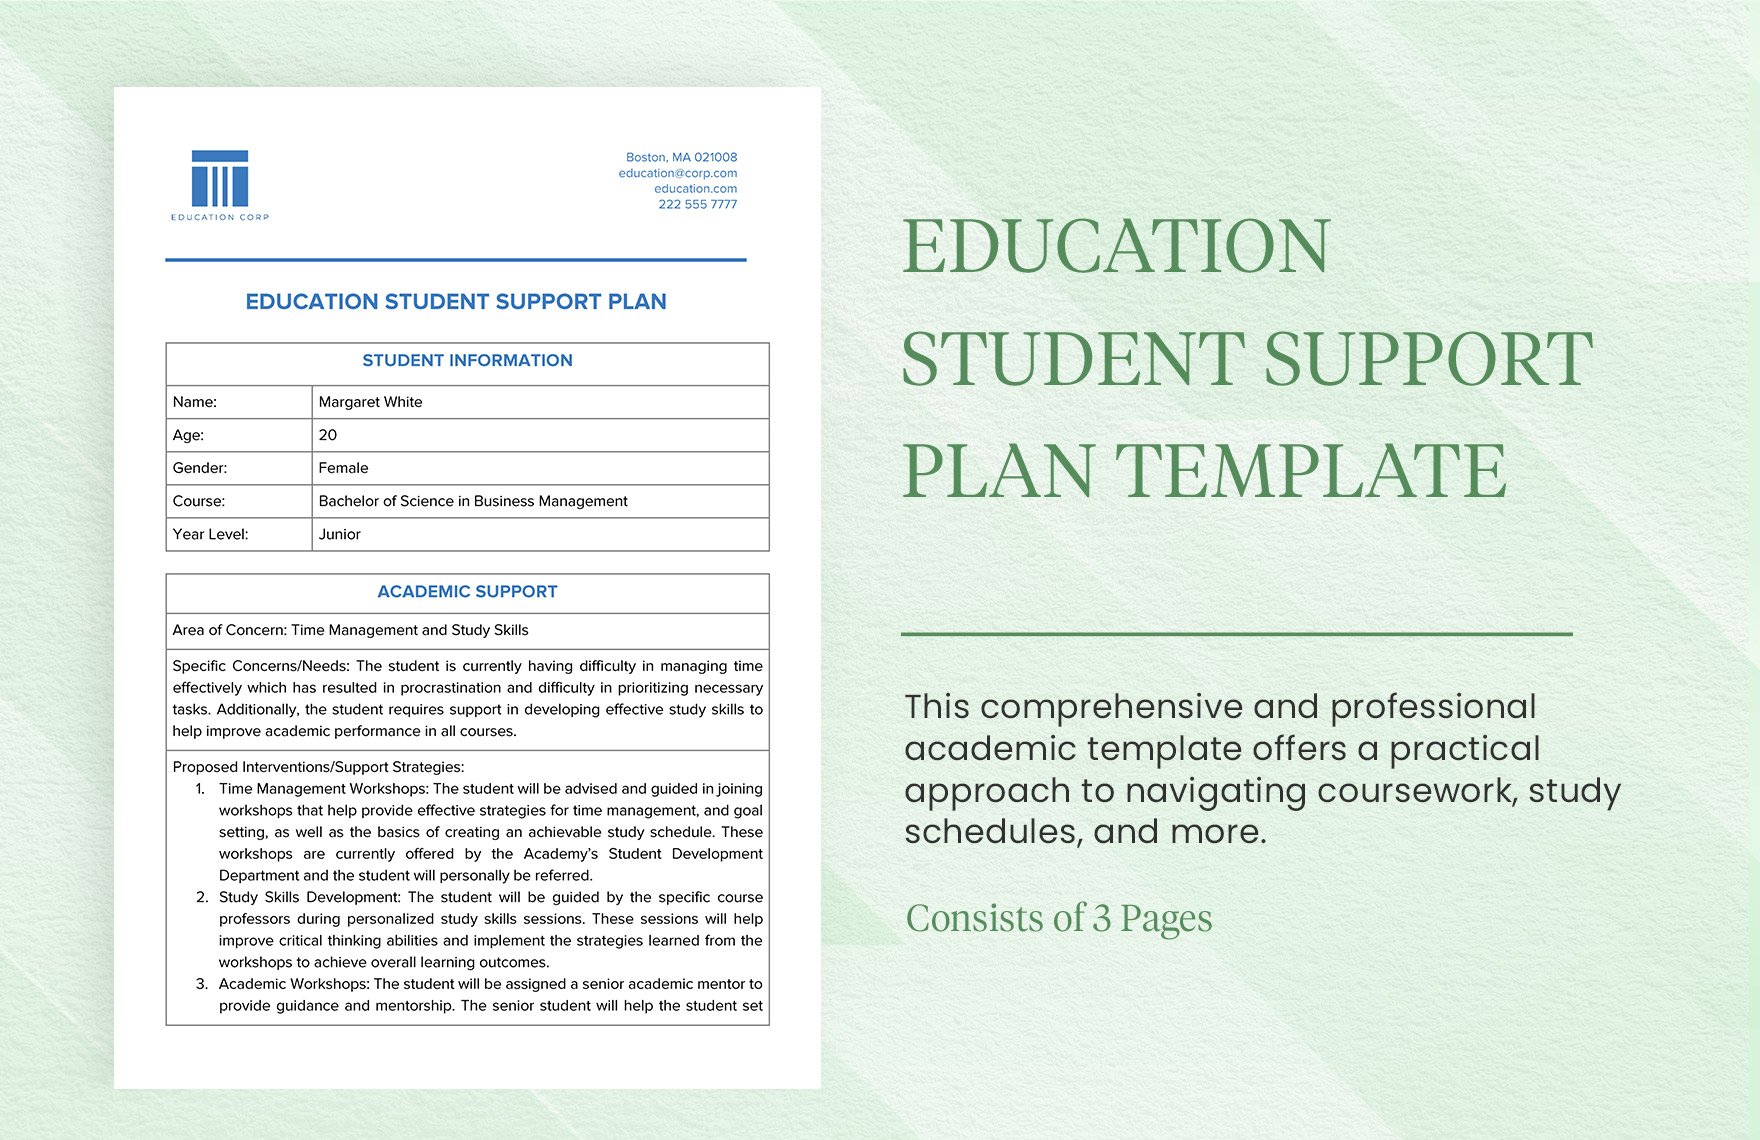 Education Student Support Plan Template in Word, PDF, Google Docs ...